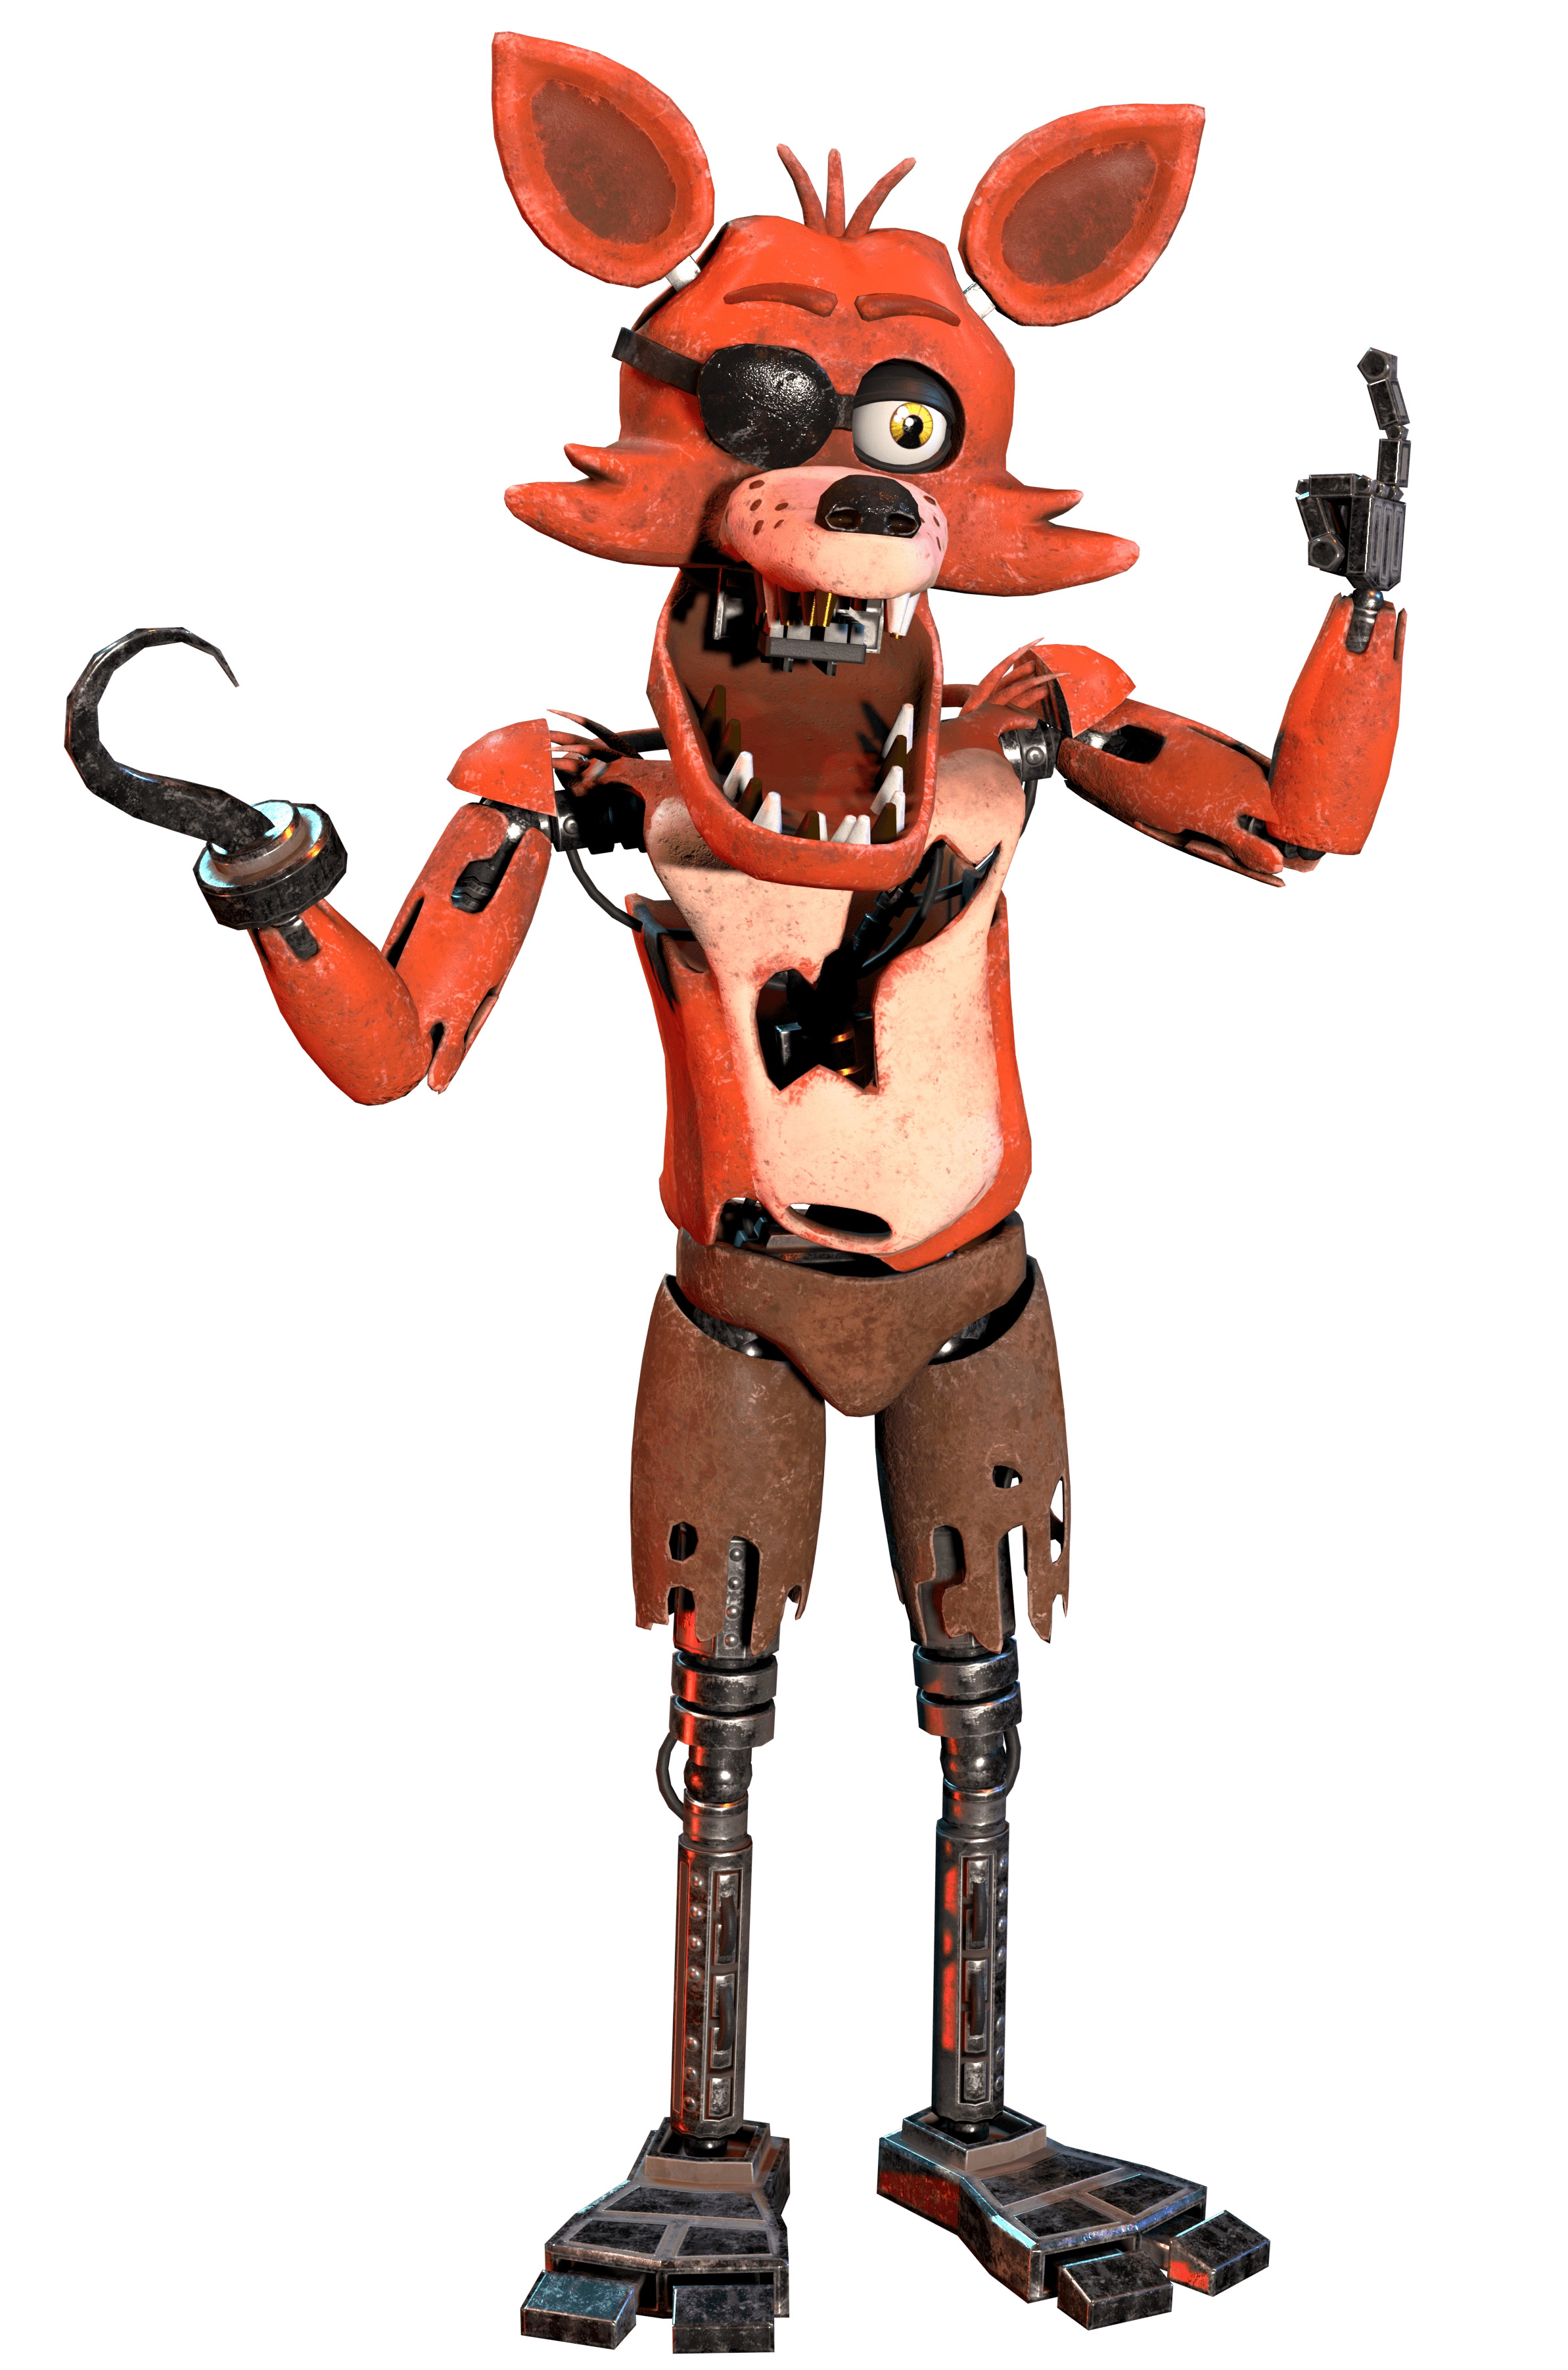 An image of Foxy from Five Nights at Freddy's.